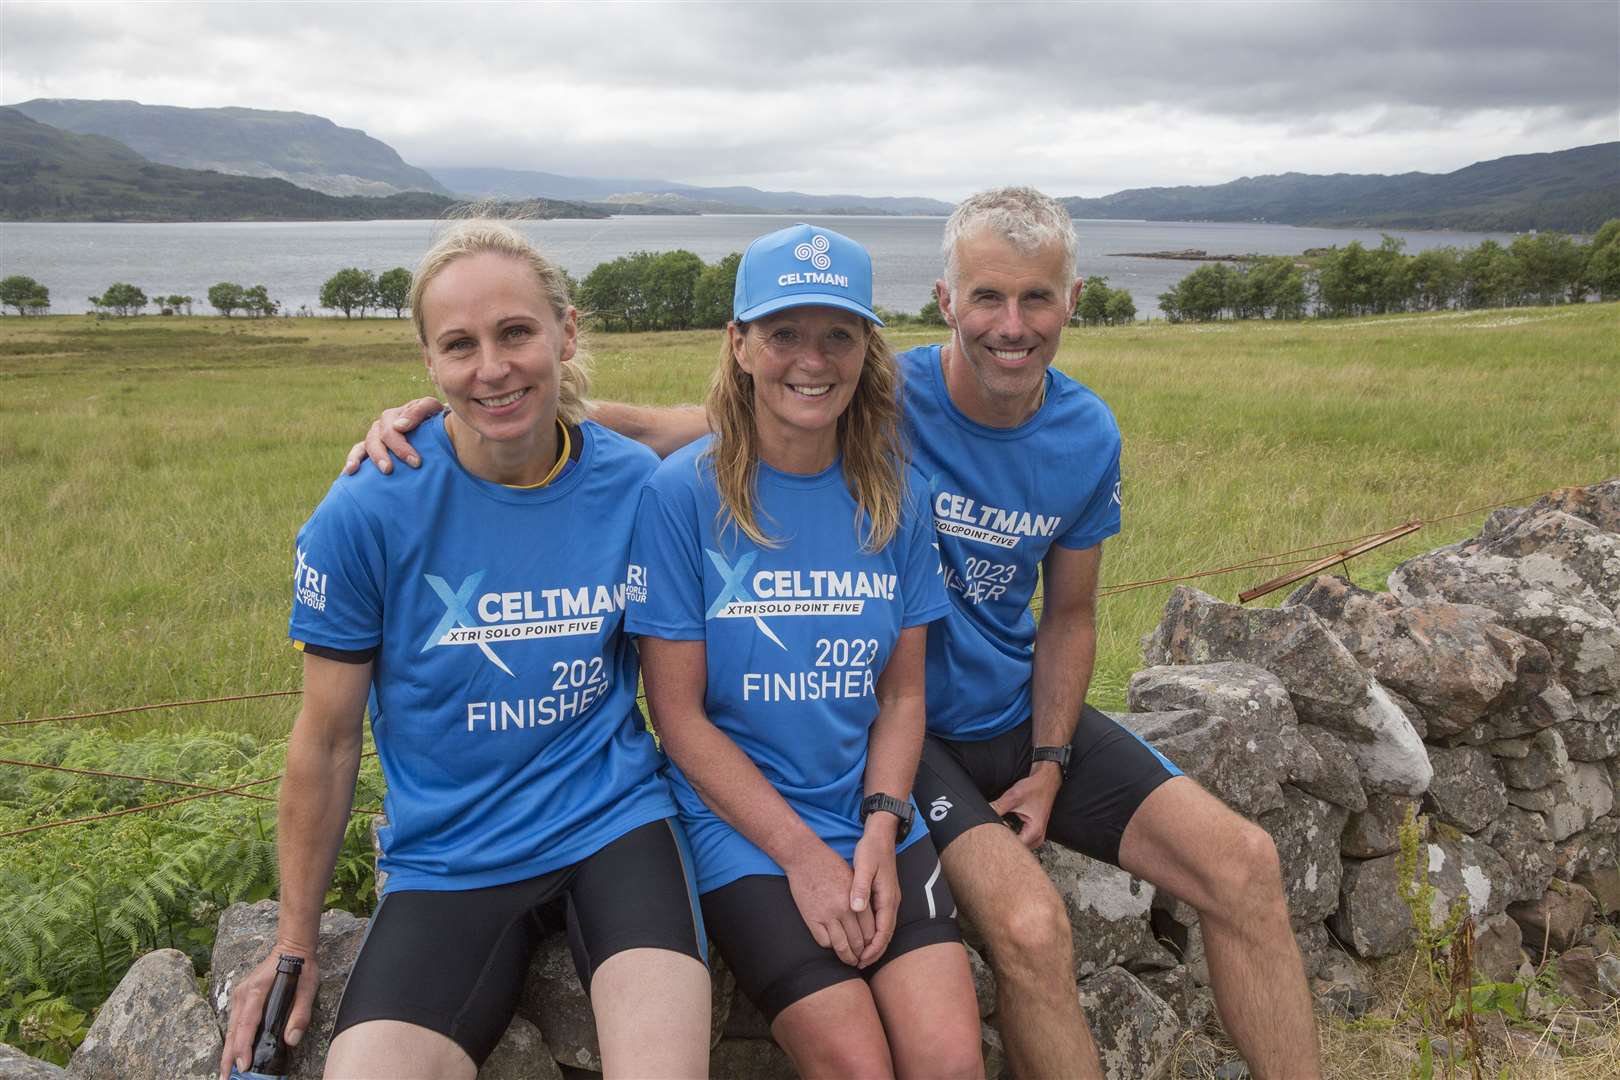 Amy Sutherland, Lorna Stanger and Kenny MacGruer after completing the Celtman Xtri Solo Point Five triathlon on Saturday. Picture: Robert MacDonald/Northern Studios